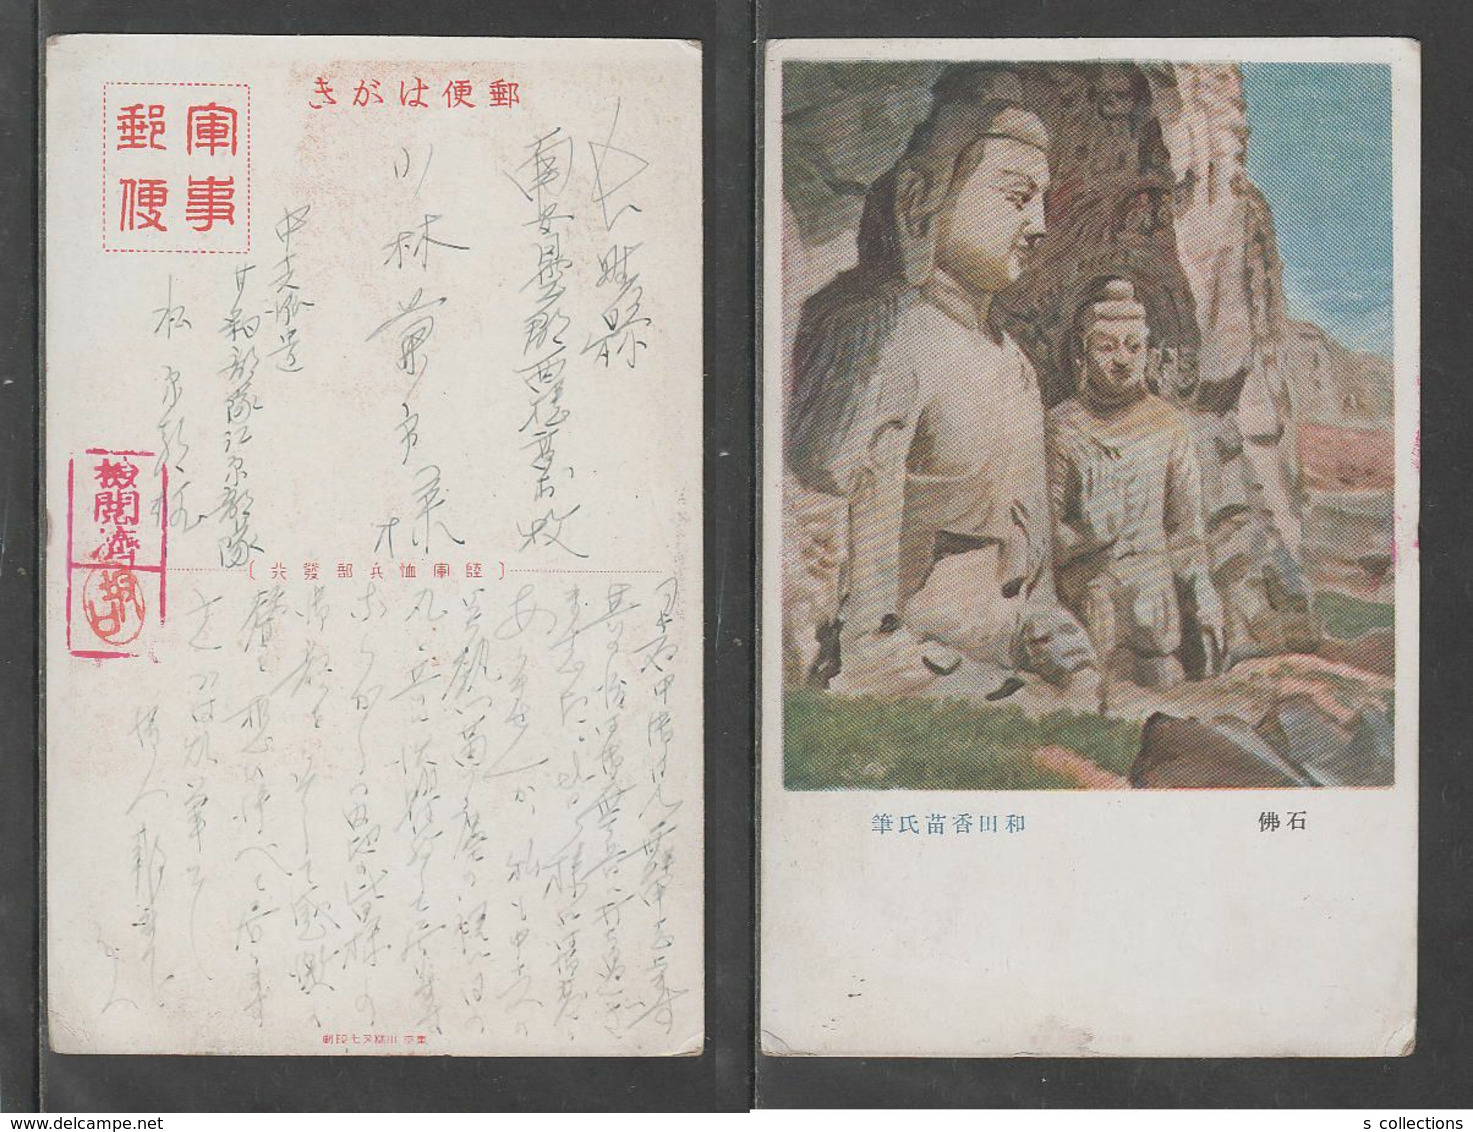 JAPAN WWII Military Stone Buddha Picture Postcard CENTRAL CHINA WW2 MANCHURIA CHINE MANDCHOUKOUO JAPON GIAPPONE - 1943-45 Shanghai & Nanjing